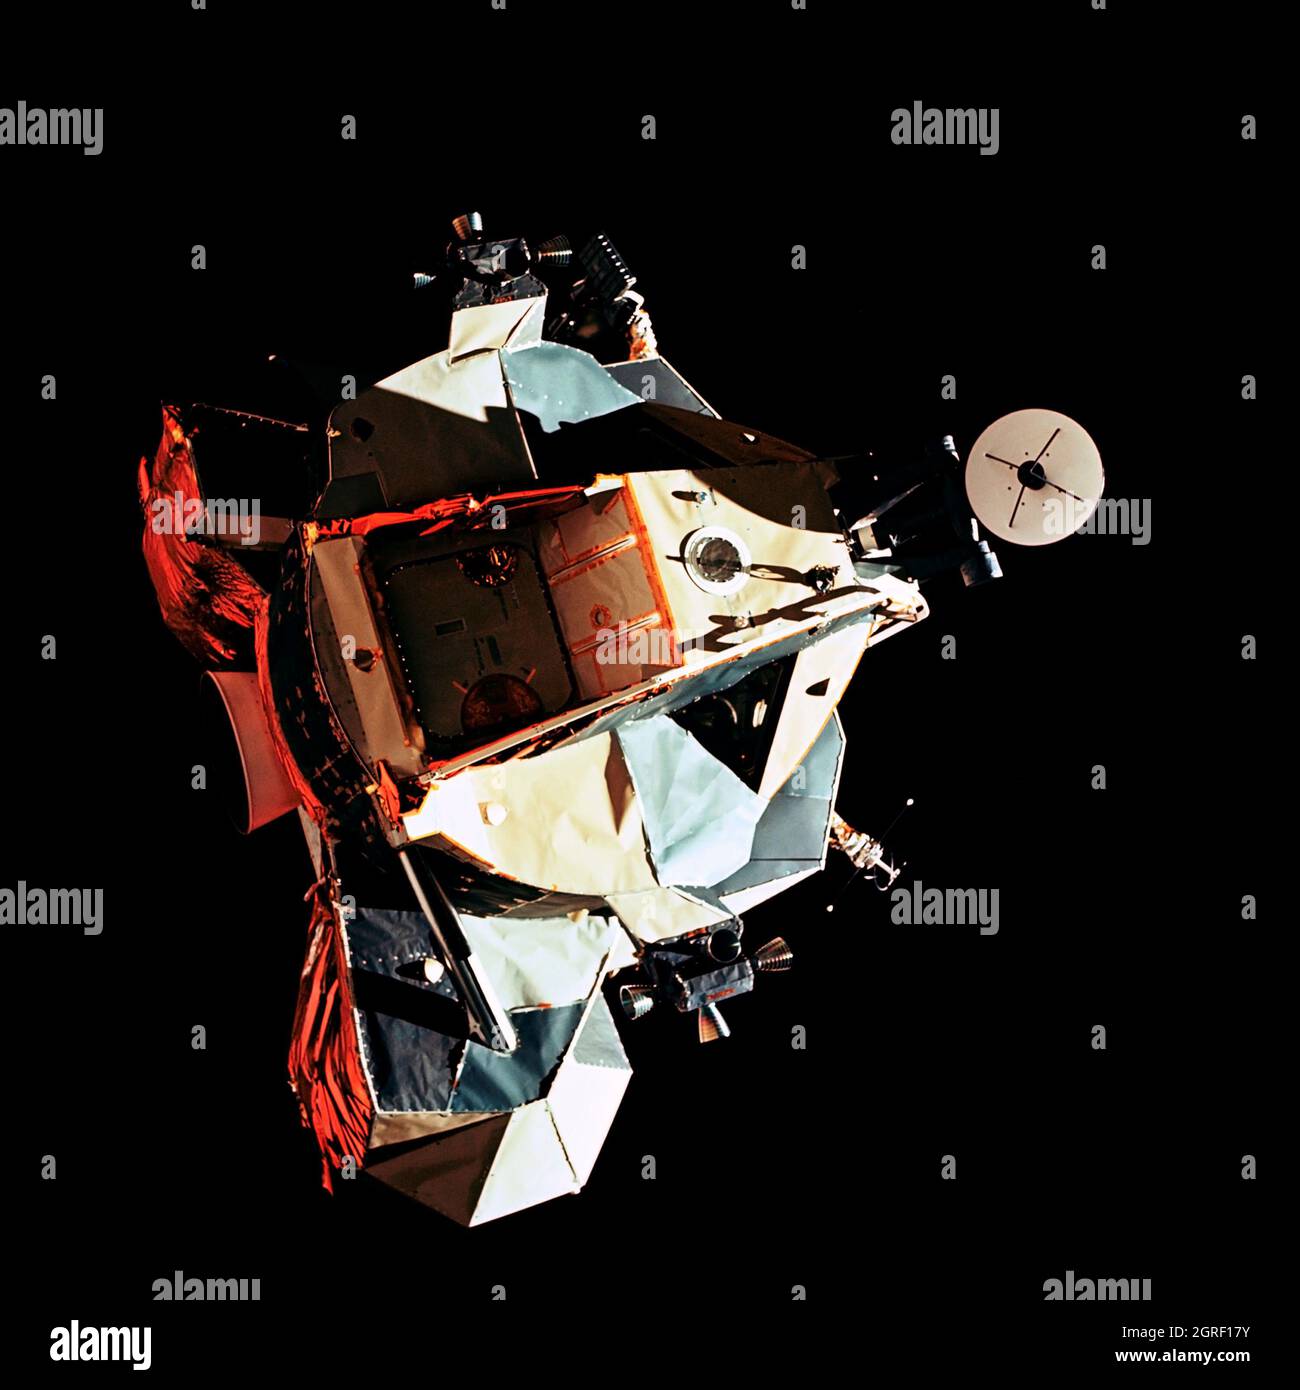 (14 Dec. 1972) --- This 70mm view of the Lunar Module (LM) 'Challenger' in lunar orbit before rendezvous with the Apollo 17 Command and Service Modules (CSM). While astronauts Eugene A. Cernan, commander, and Harrison H. Schmitt, lunar module pilot, descended in the Challenger to explore the Taurus-Littrow region of the moon, astronaut Ronald E. Evans, command module pilot, remained with the CSM 'America' in lunar orbit. Stock Photo